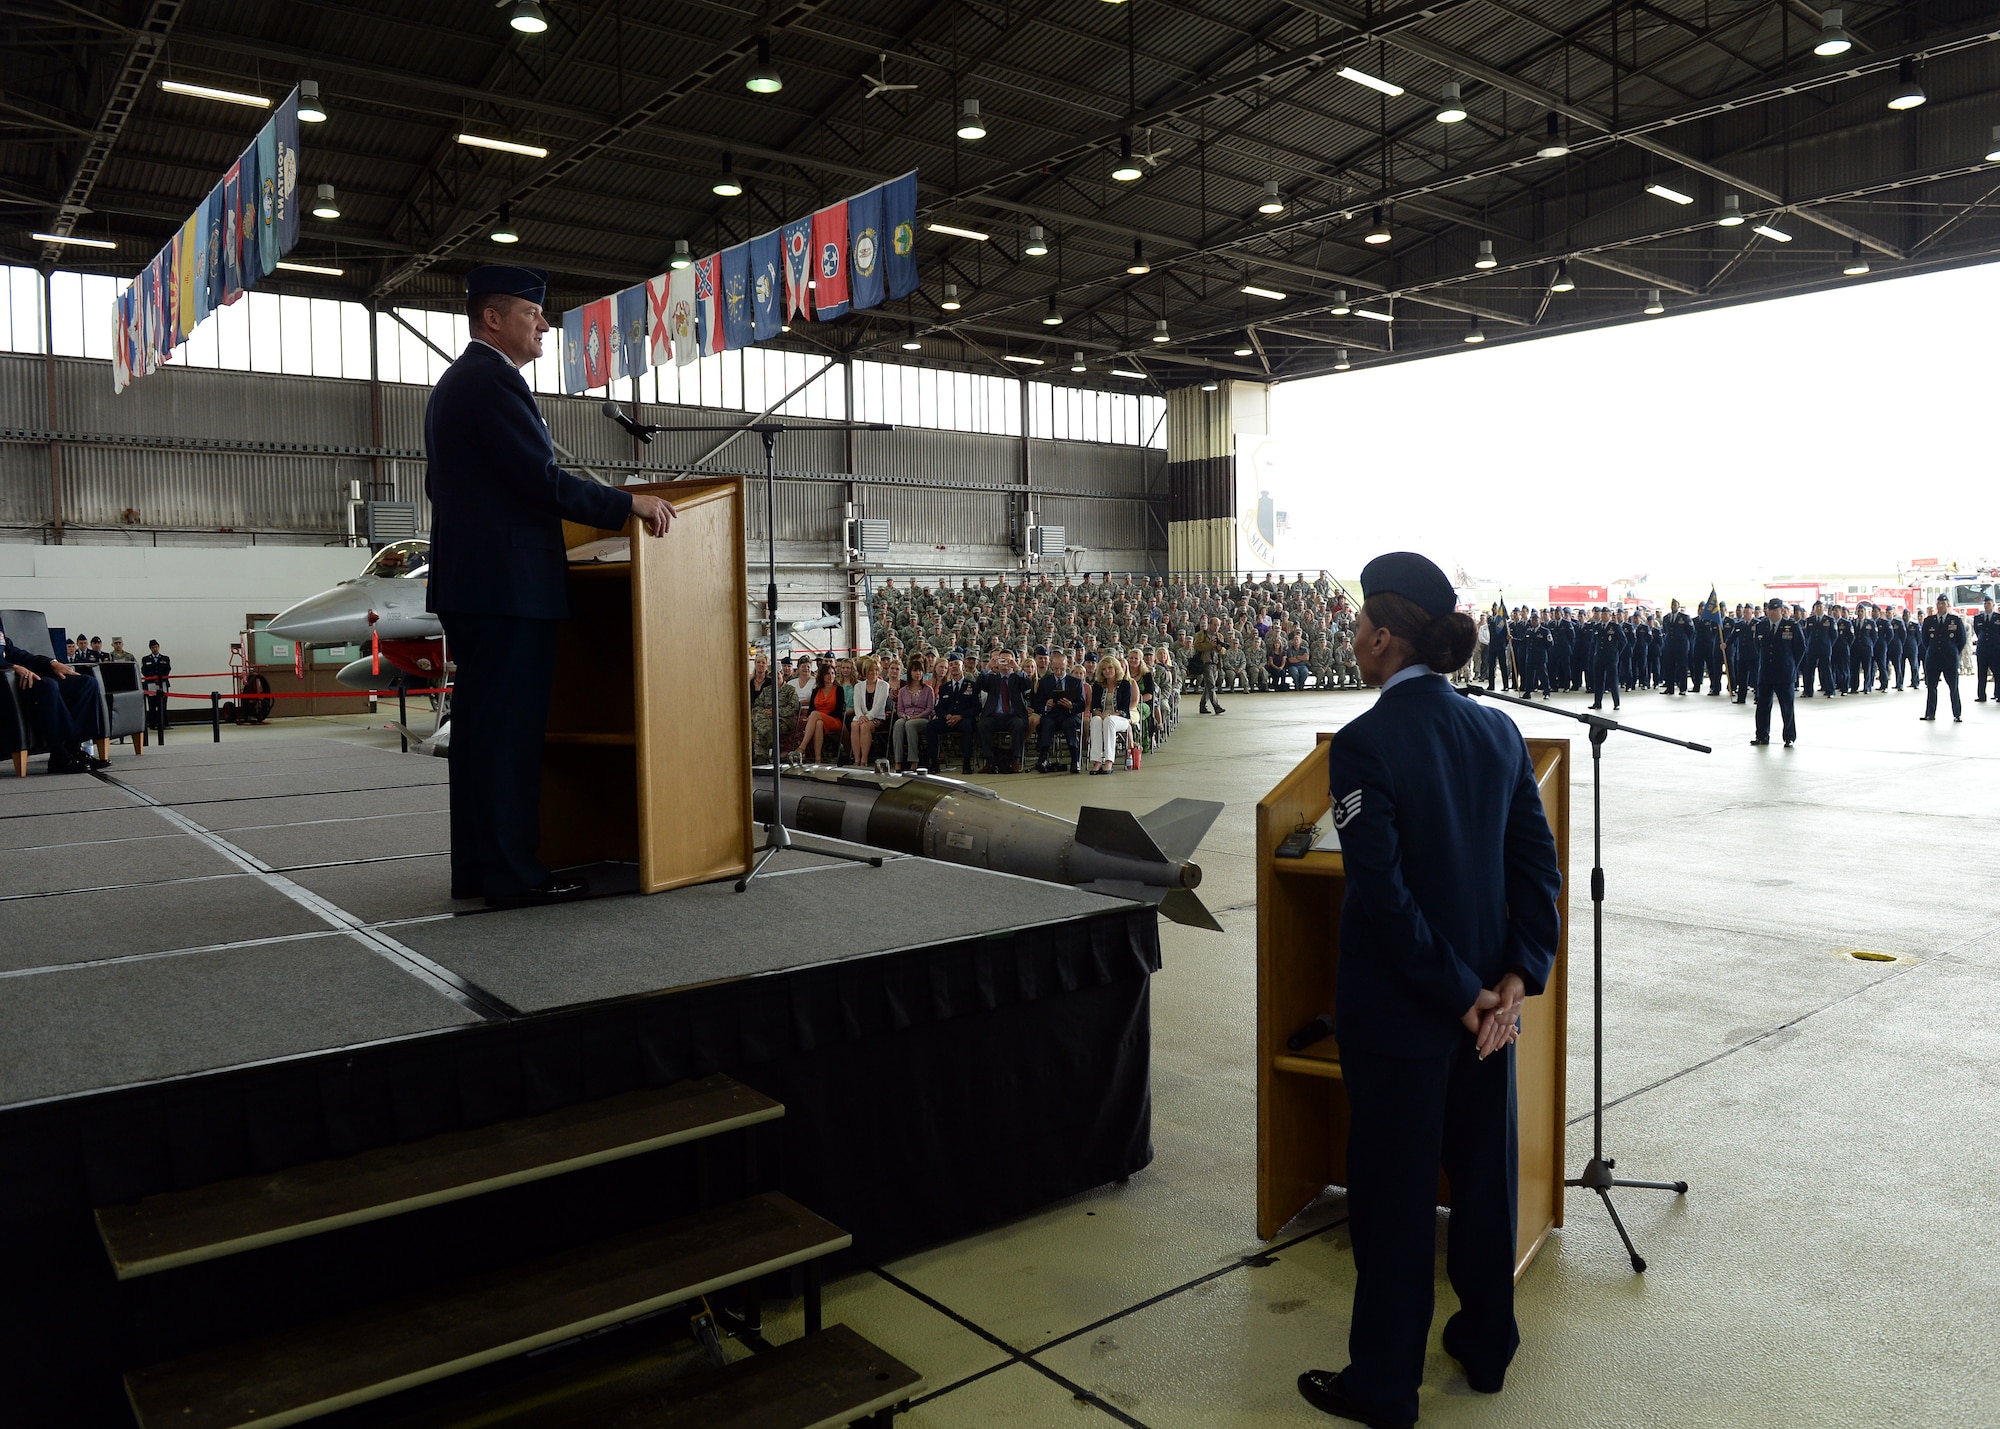 U.S. Air Force Col. Peter Bilodeau, 52nd Fighter Wing commander, addresses his Airmen during an assumption of command ceremony July 11, 2014, at Spangdahlem Air Base, Germany. Bilodeau is a command pilot with more than 3,000 flying hours, including 450 combat hours over Serbia and Iraq in operations Allied Force, Southern Watch, Northern Watch and Iraqi Freedom. (U.S. Air Force photo by Staff Sgt. Daryl Knee/Released)